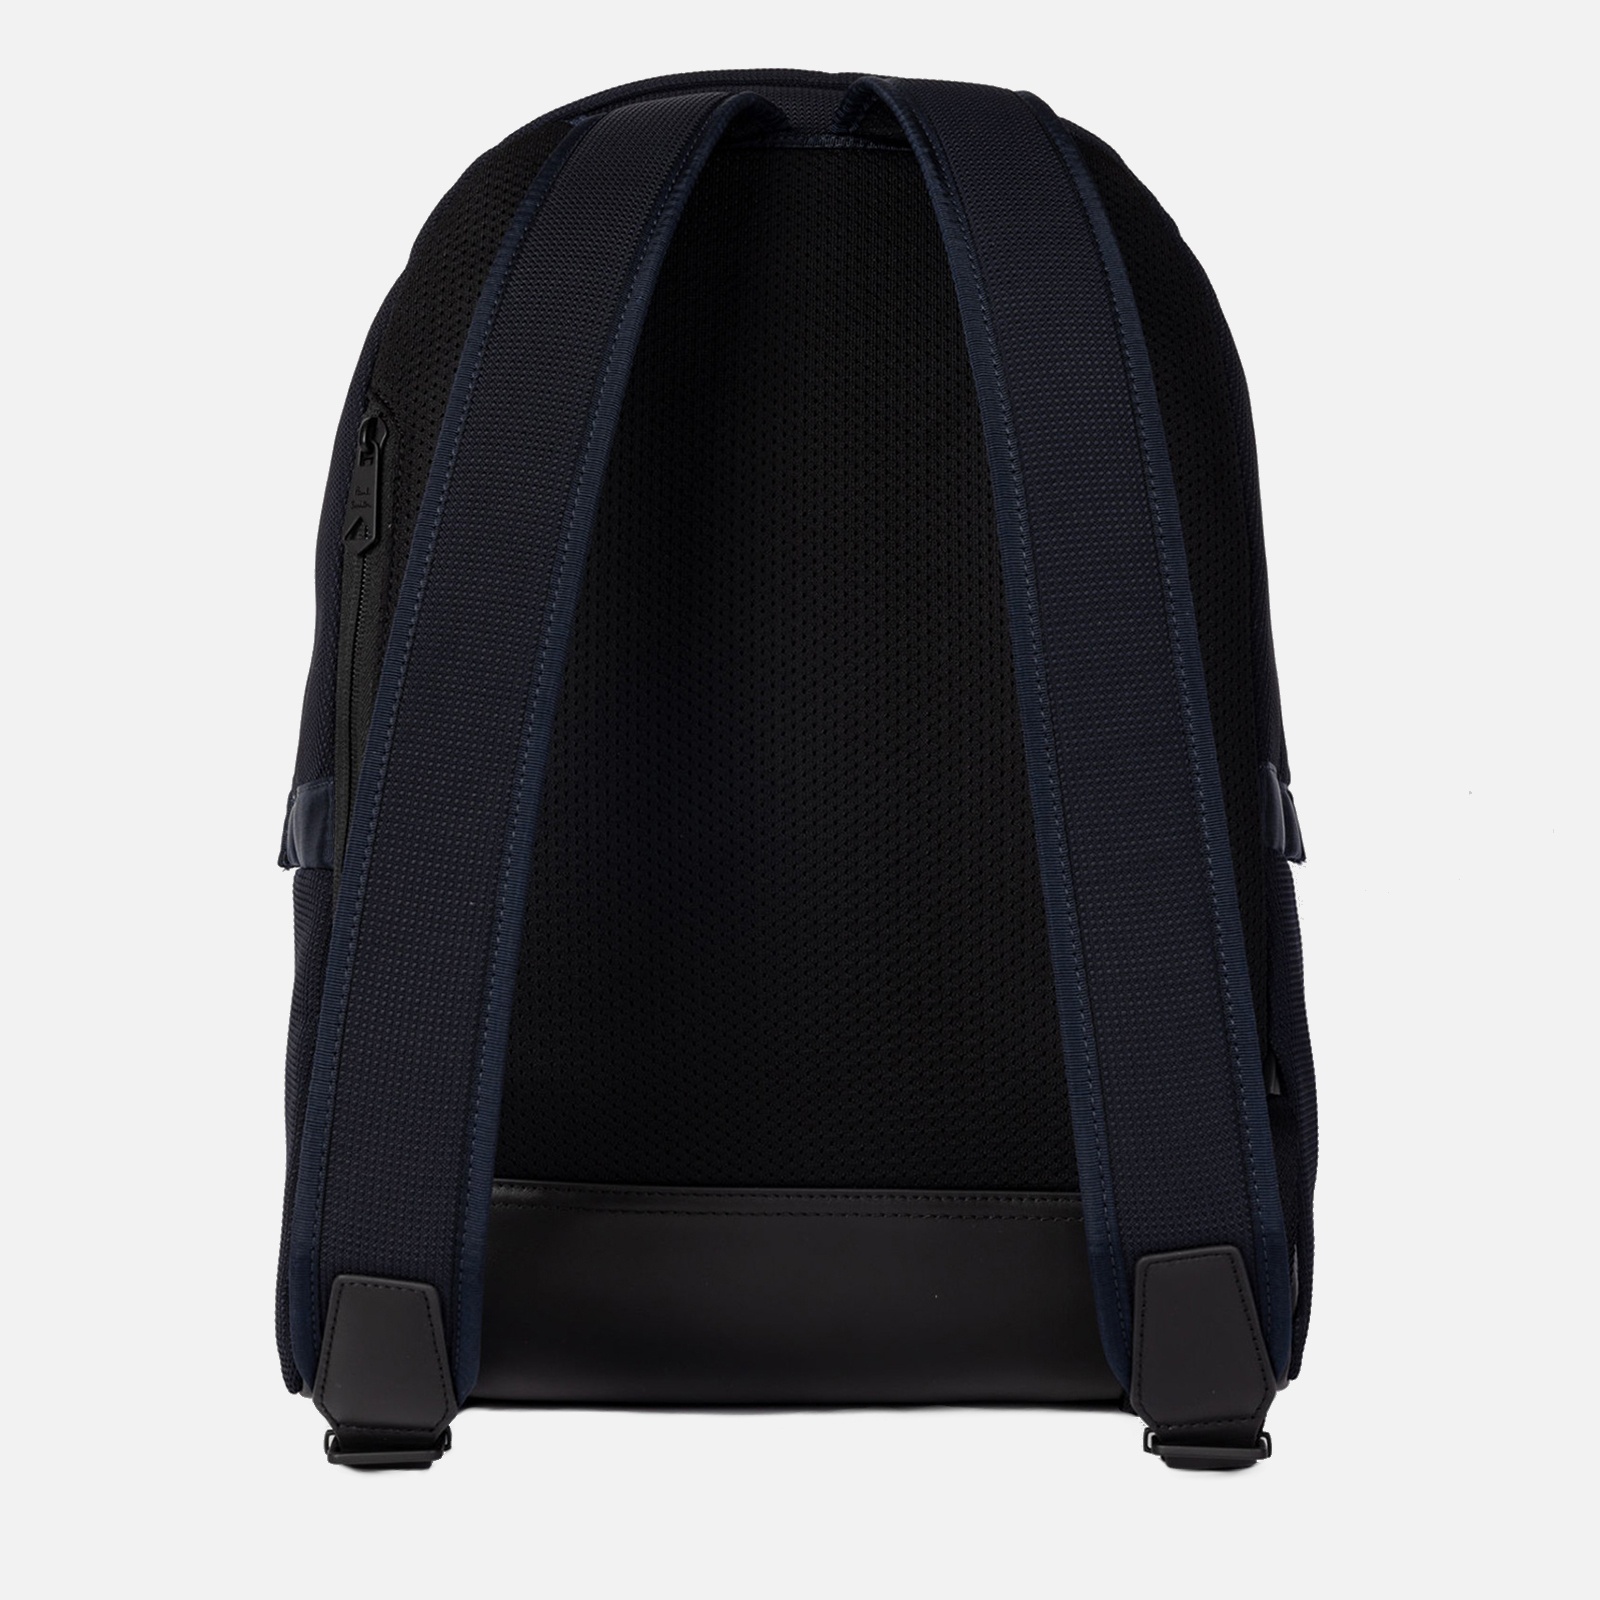 Paul Smith Canvas Backpack - 2